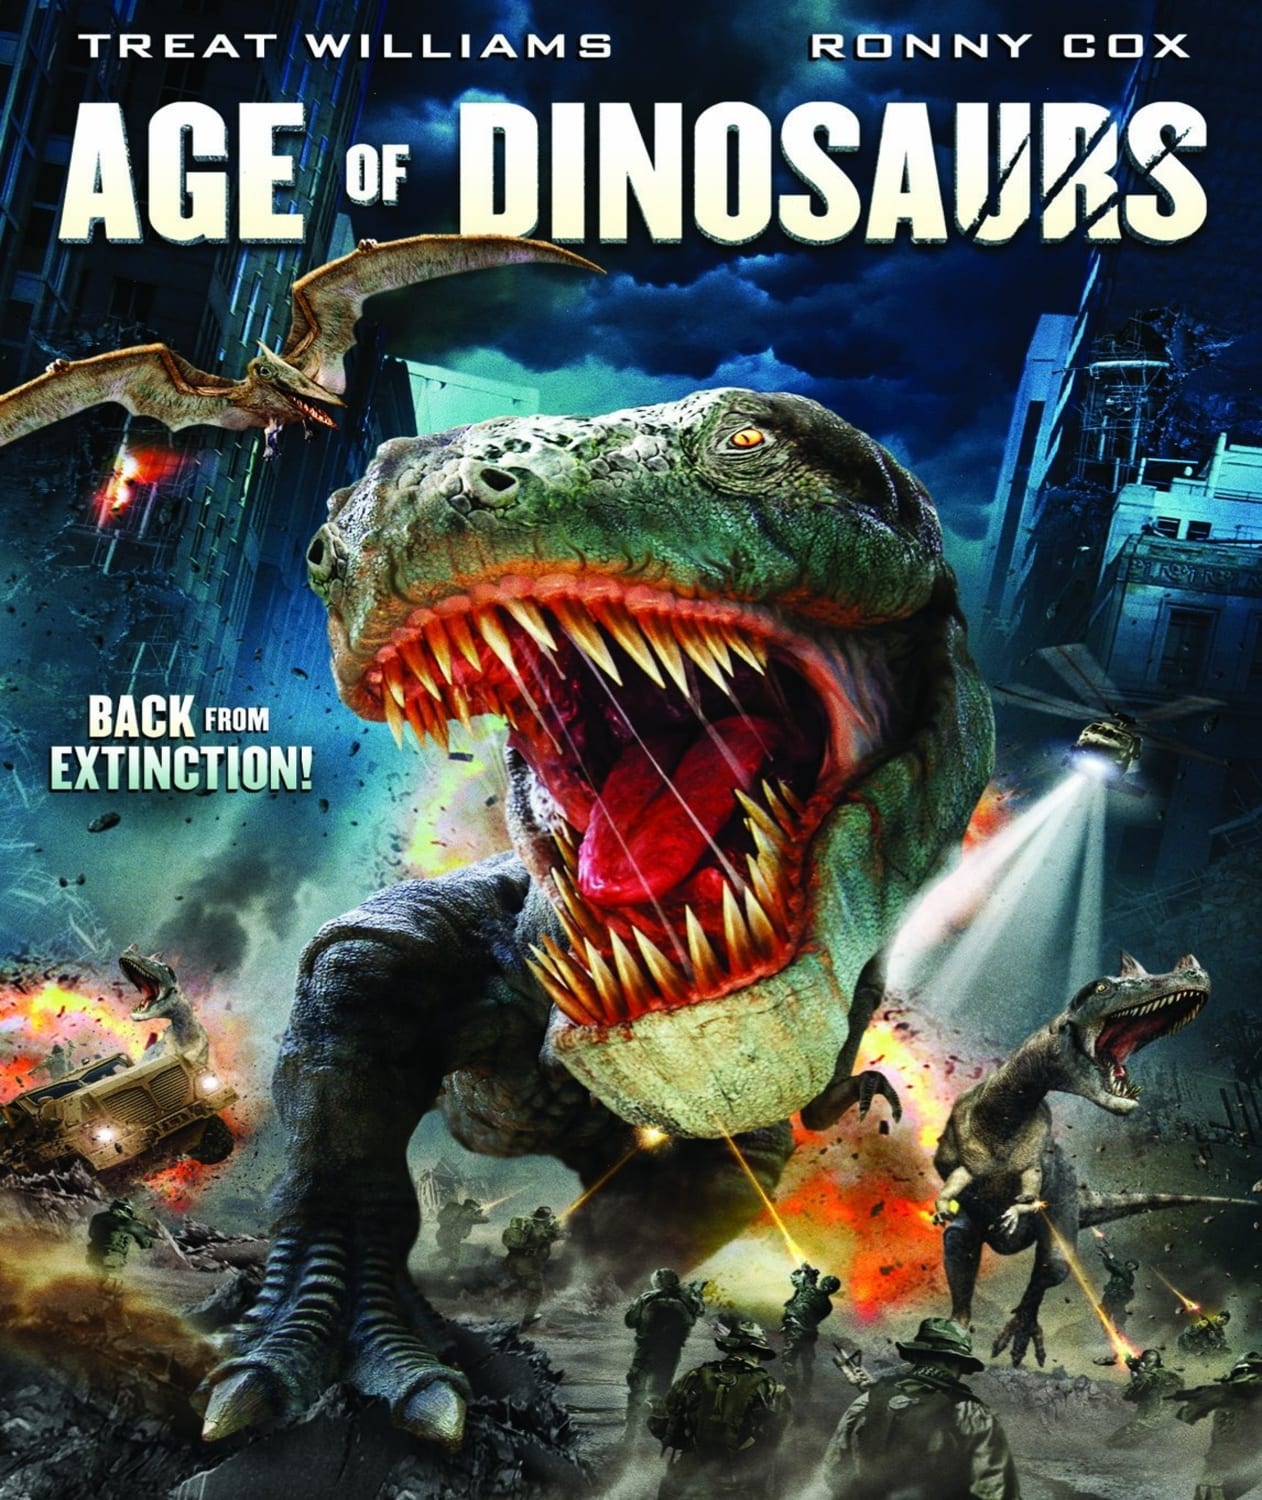 Age of Dinosaurs (Blu-ray)